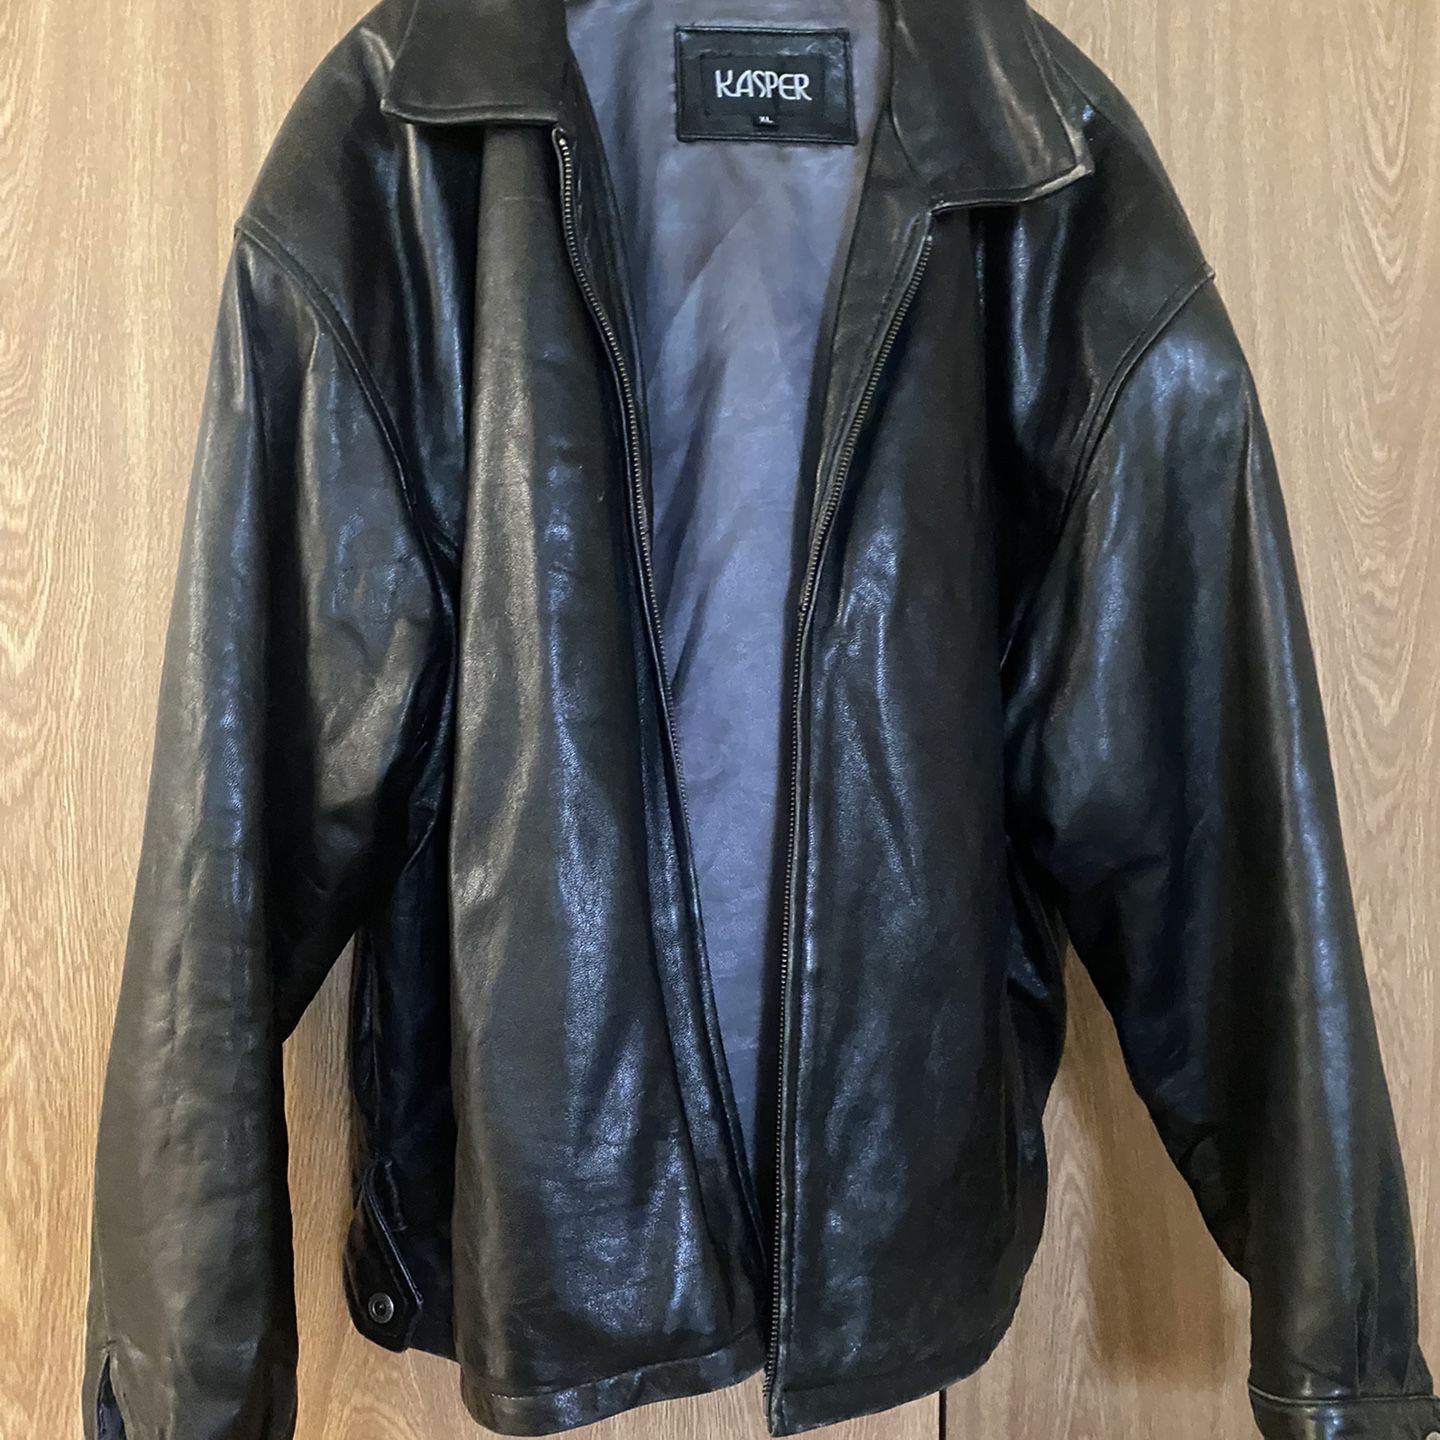 In good shape Leather Jackets $40- $50-$100 Negotiable 